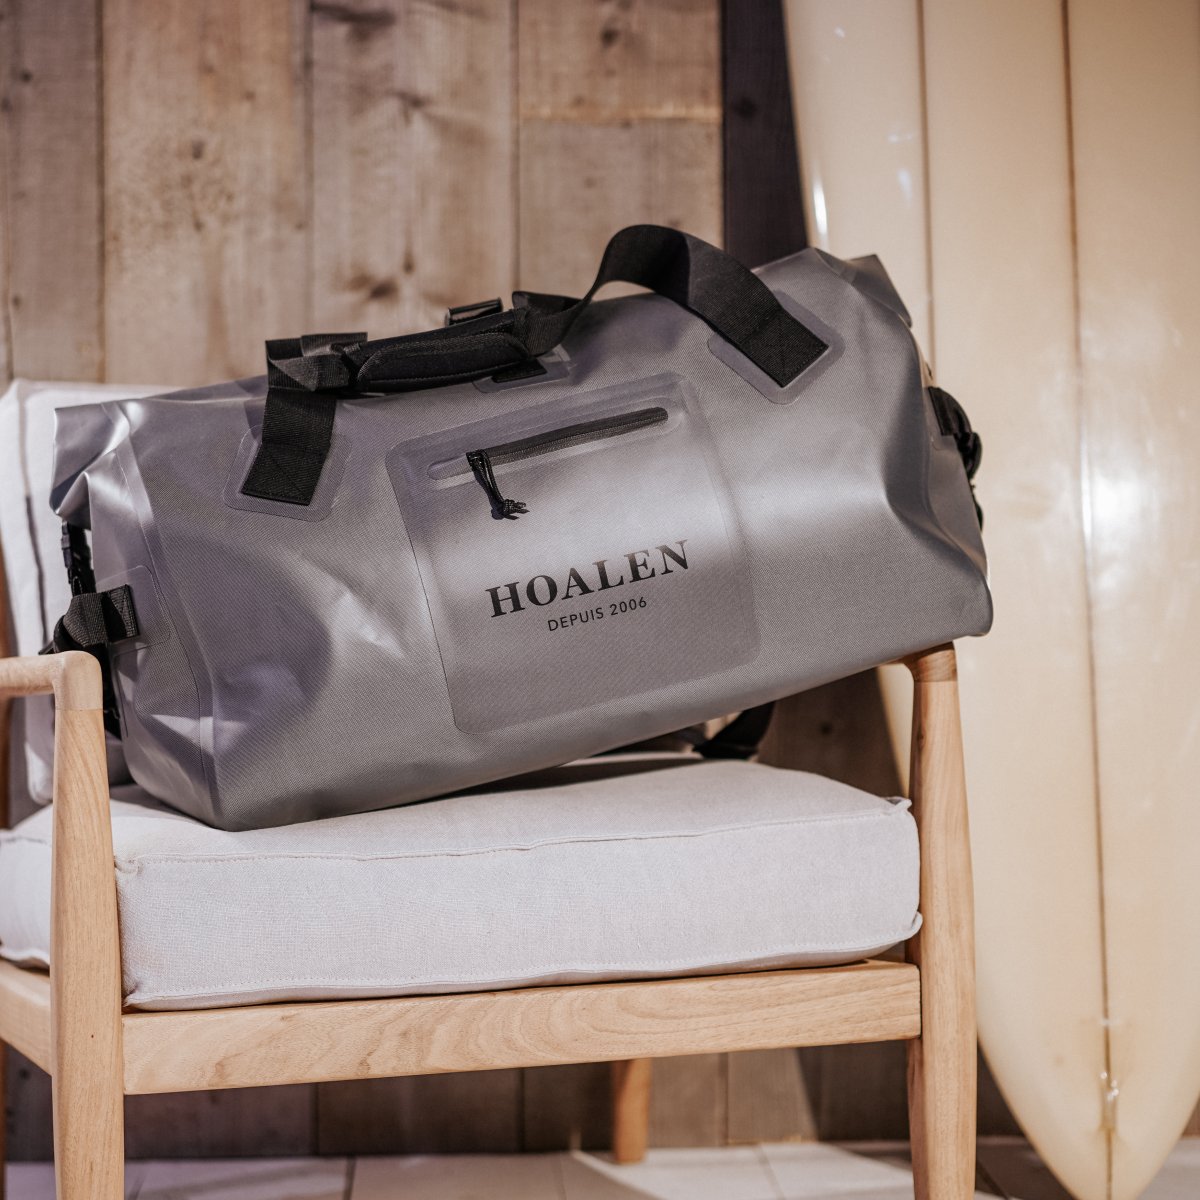 Our Sailor Bag offers waterproof protection on long trips. The rolled top, when closed with the side buckle straps, prevents water from entering, so your gear stays dry.